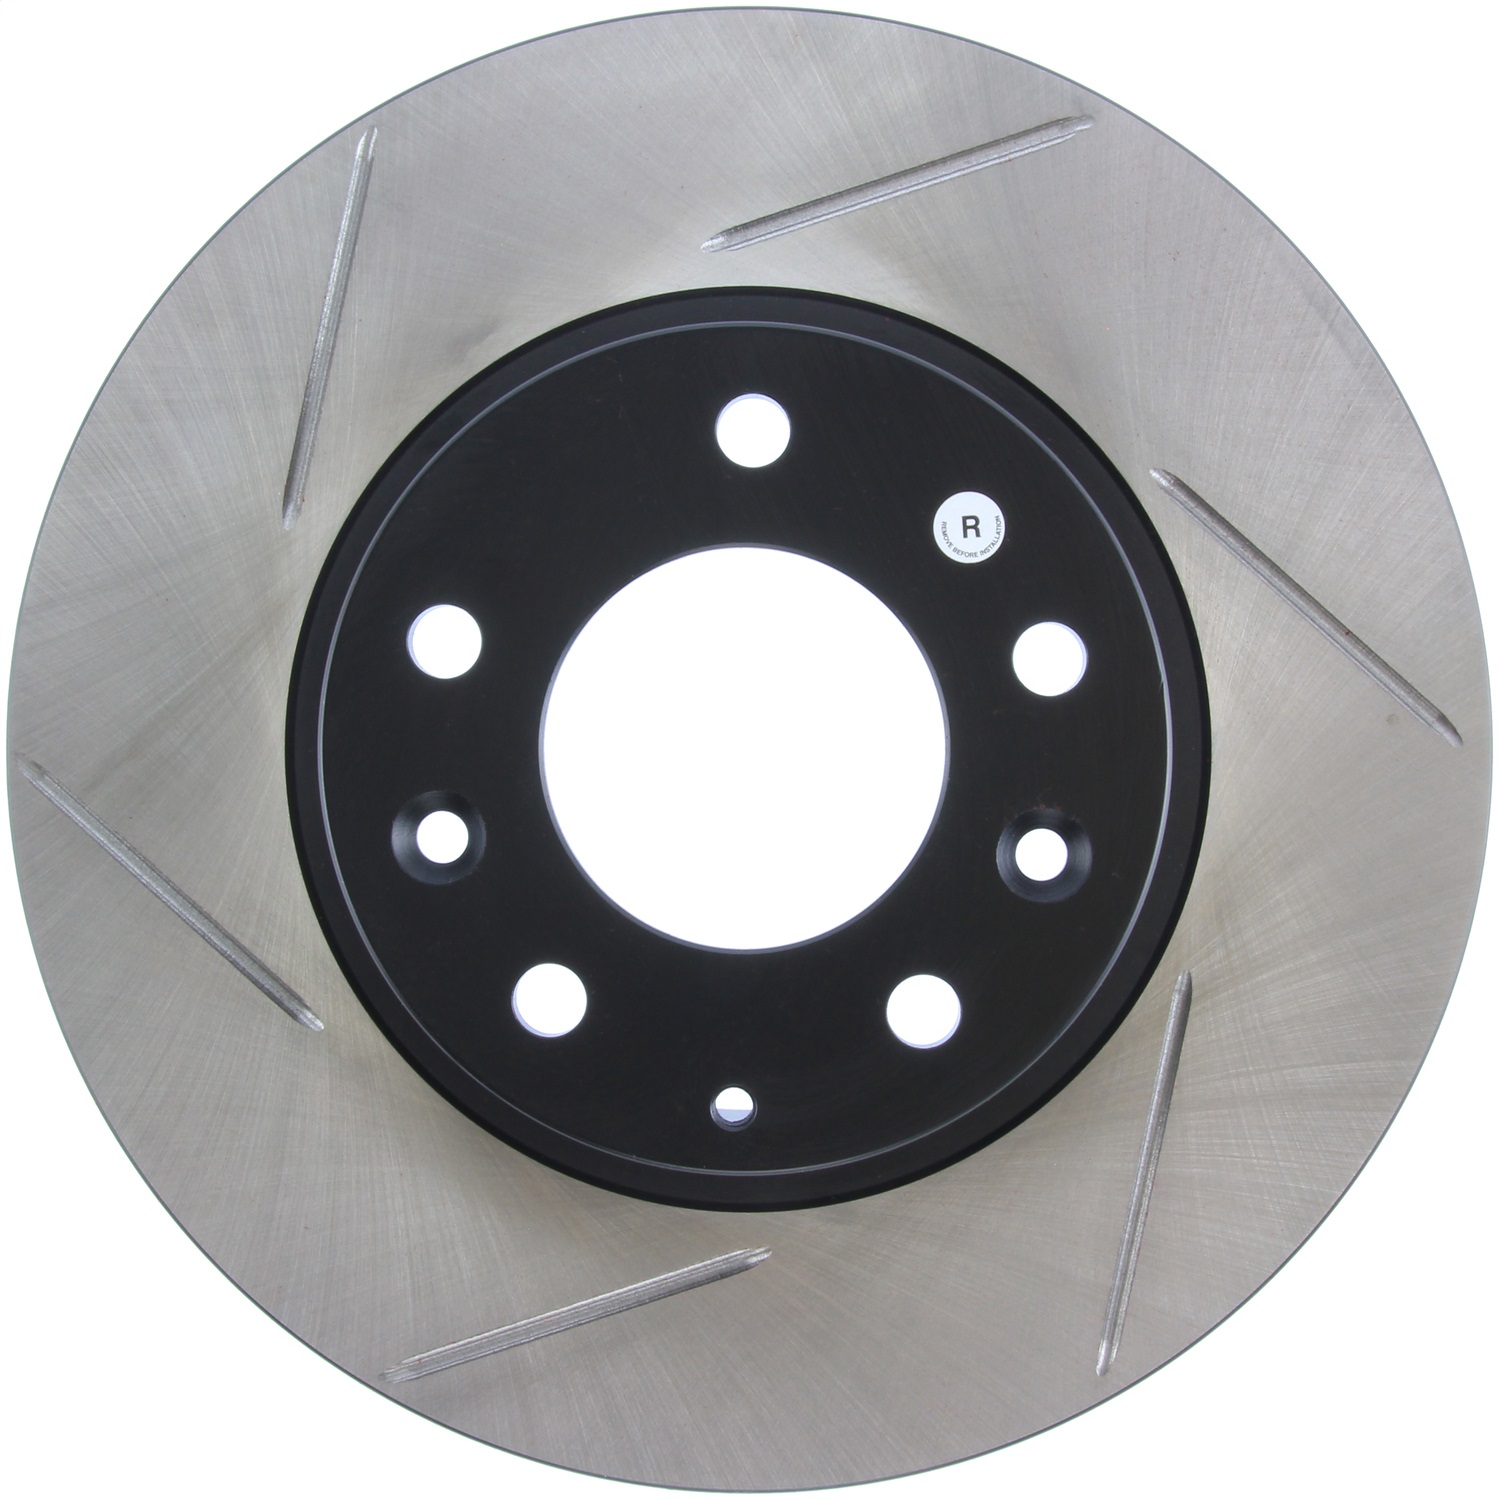 StopTech 126.45051SR Sport Slotted Disc Brake Rotor Fits 93-95 RX-7